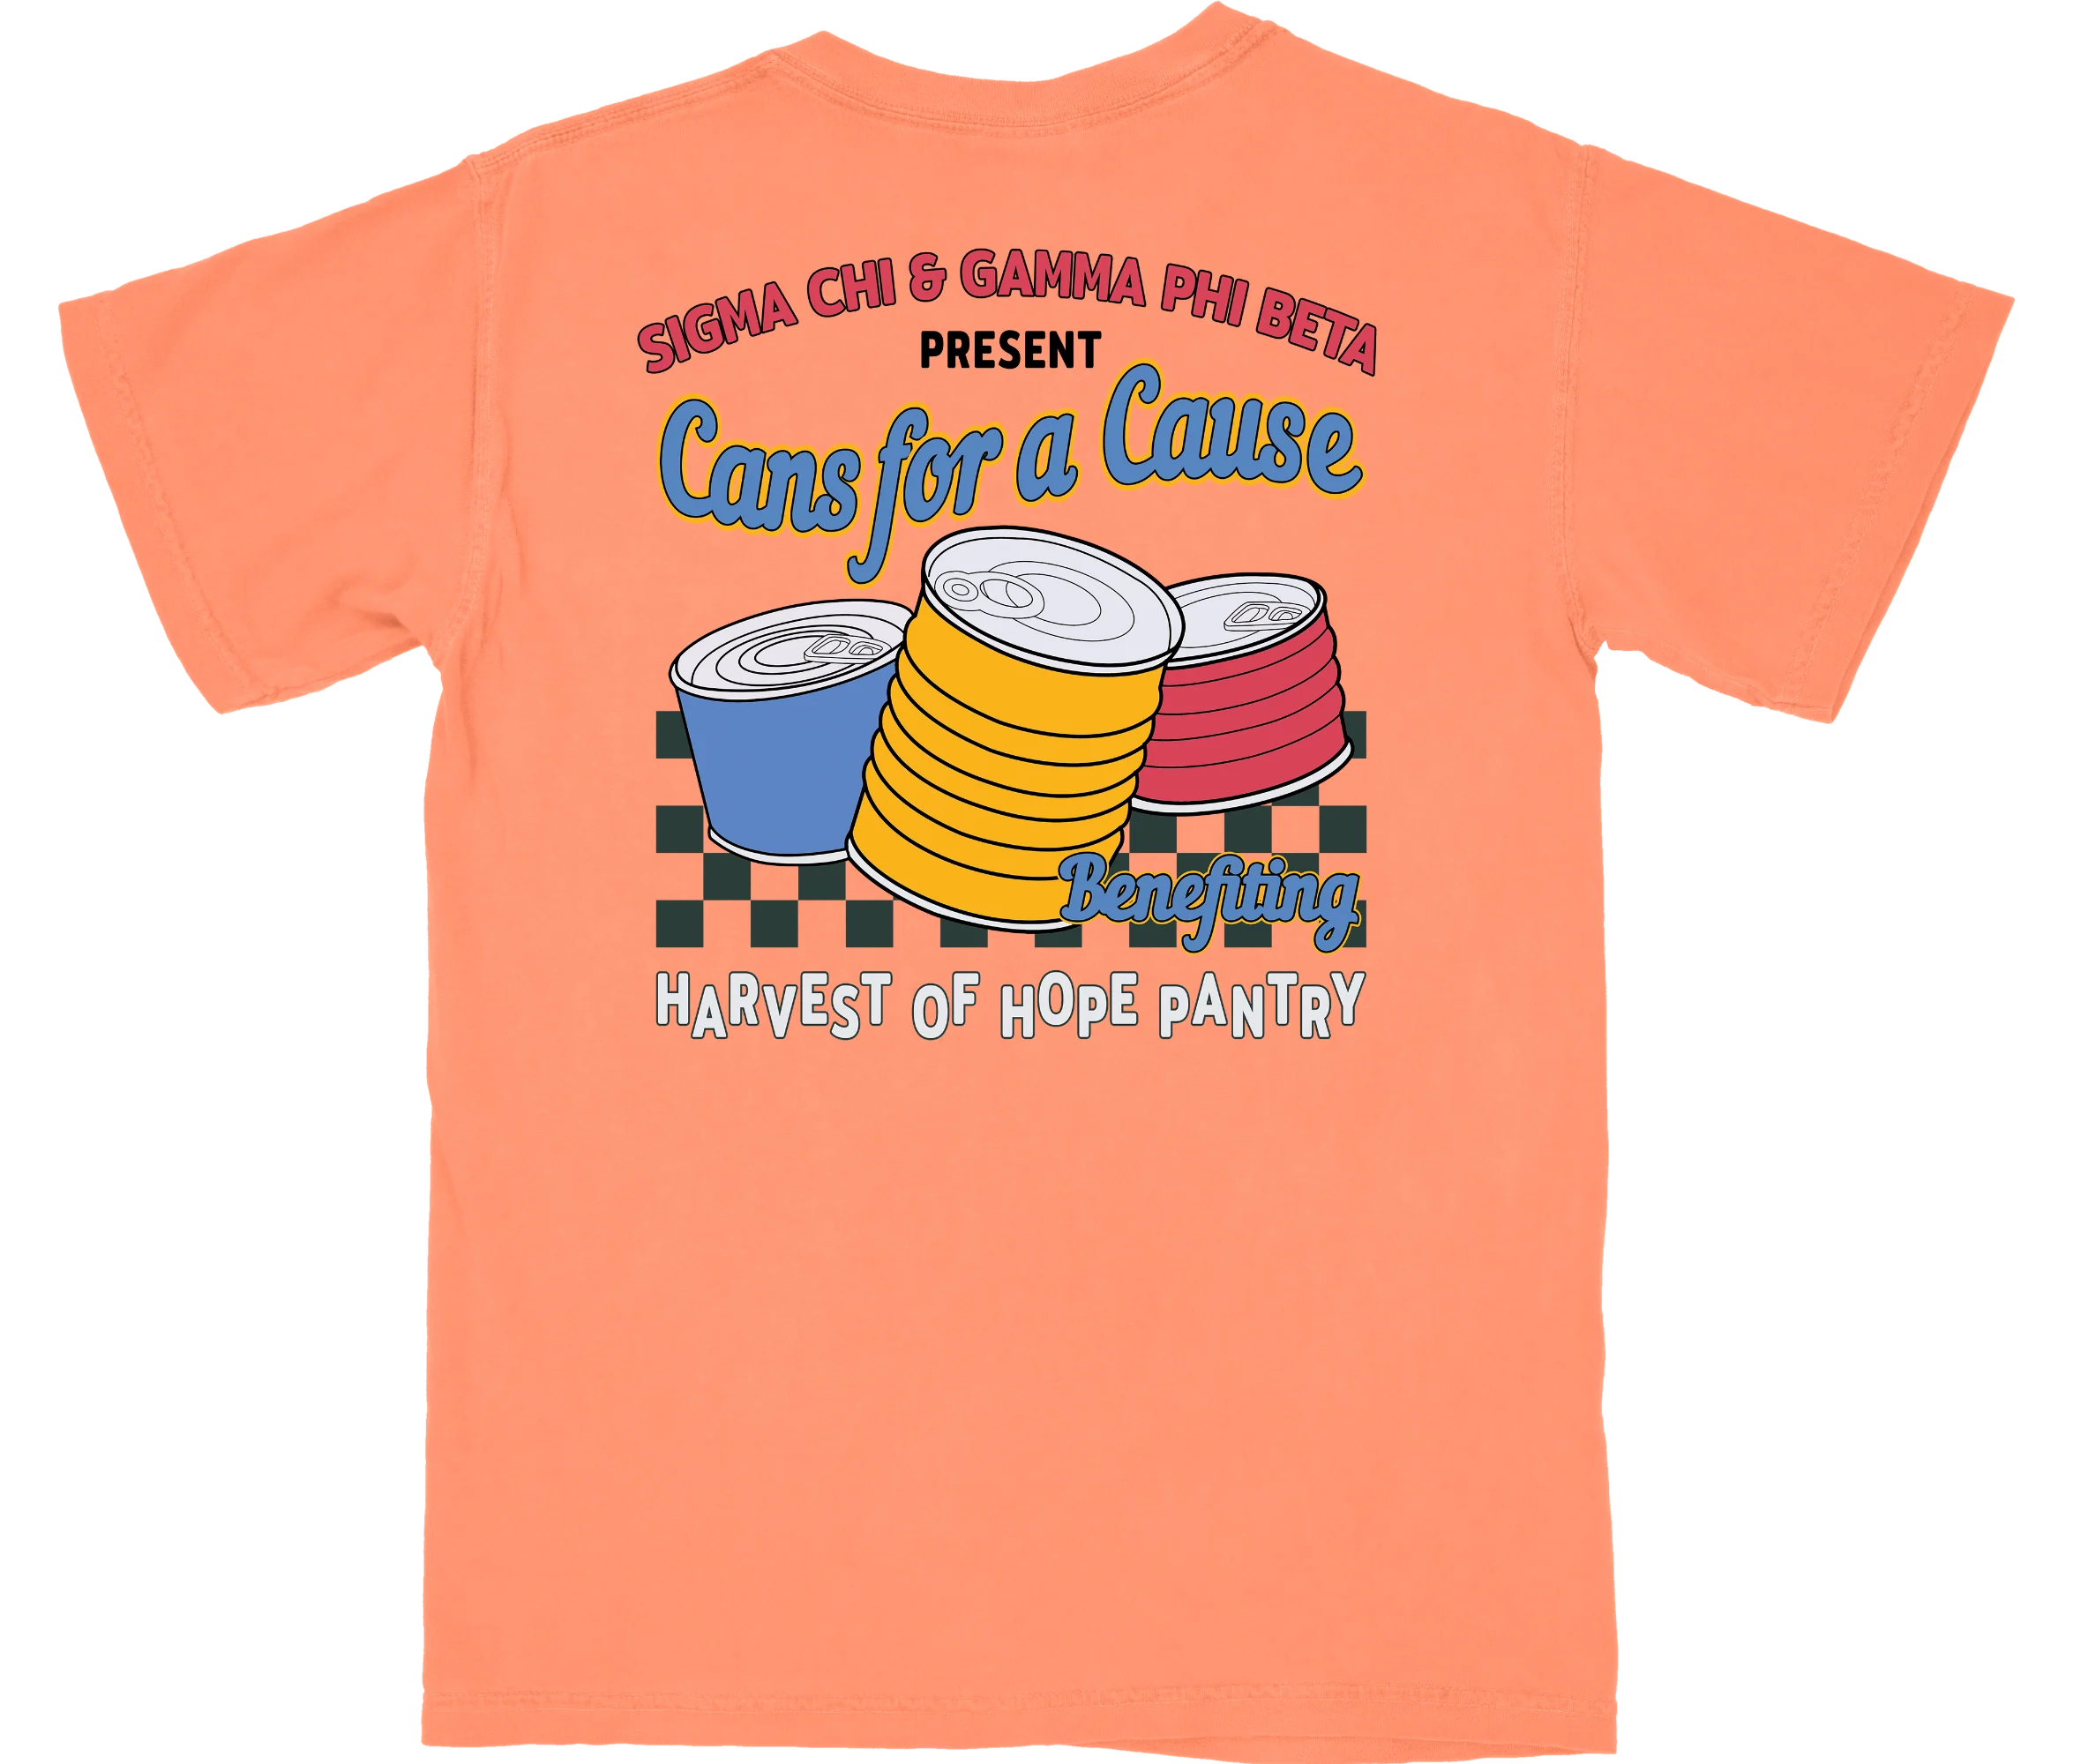 Cans for a Cause Shirt